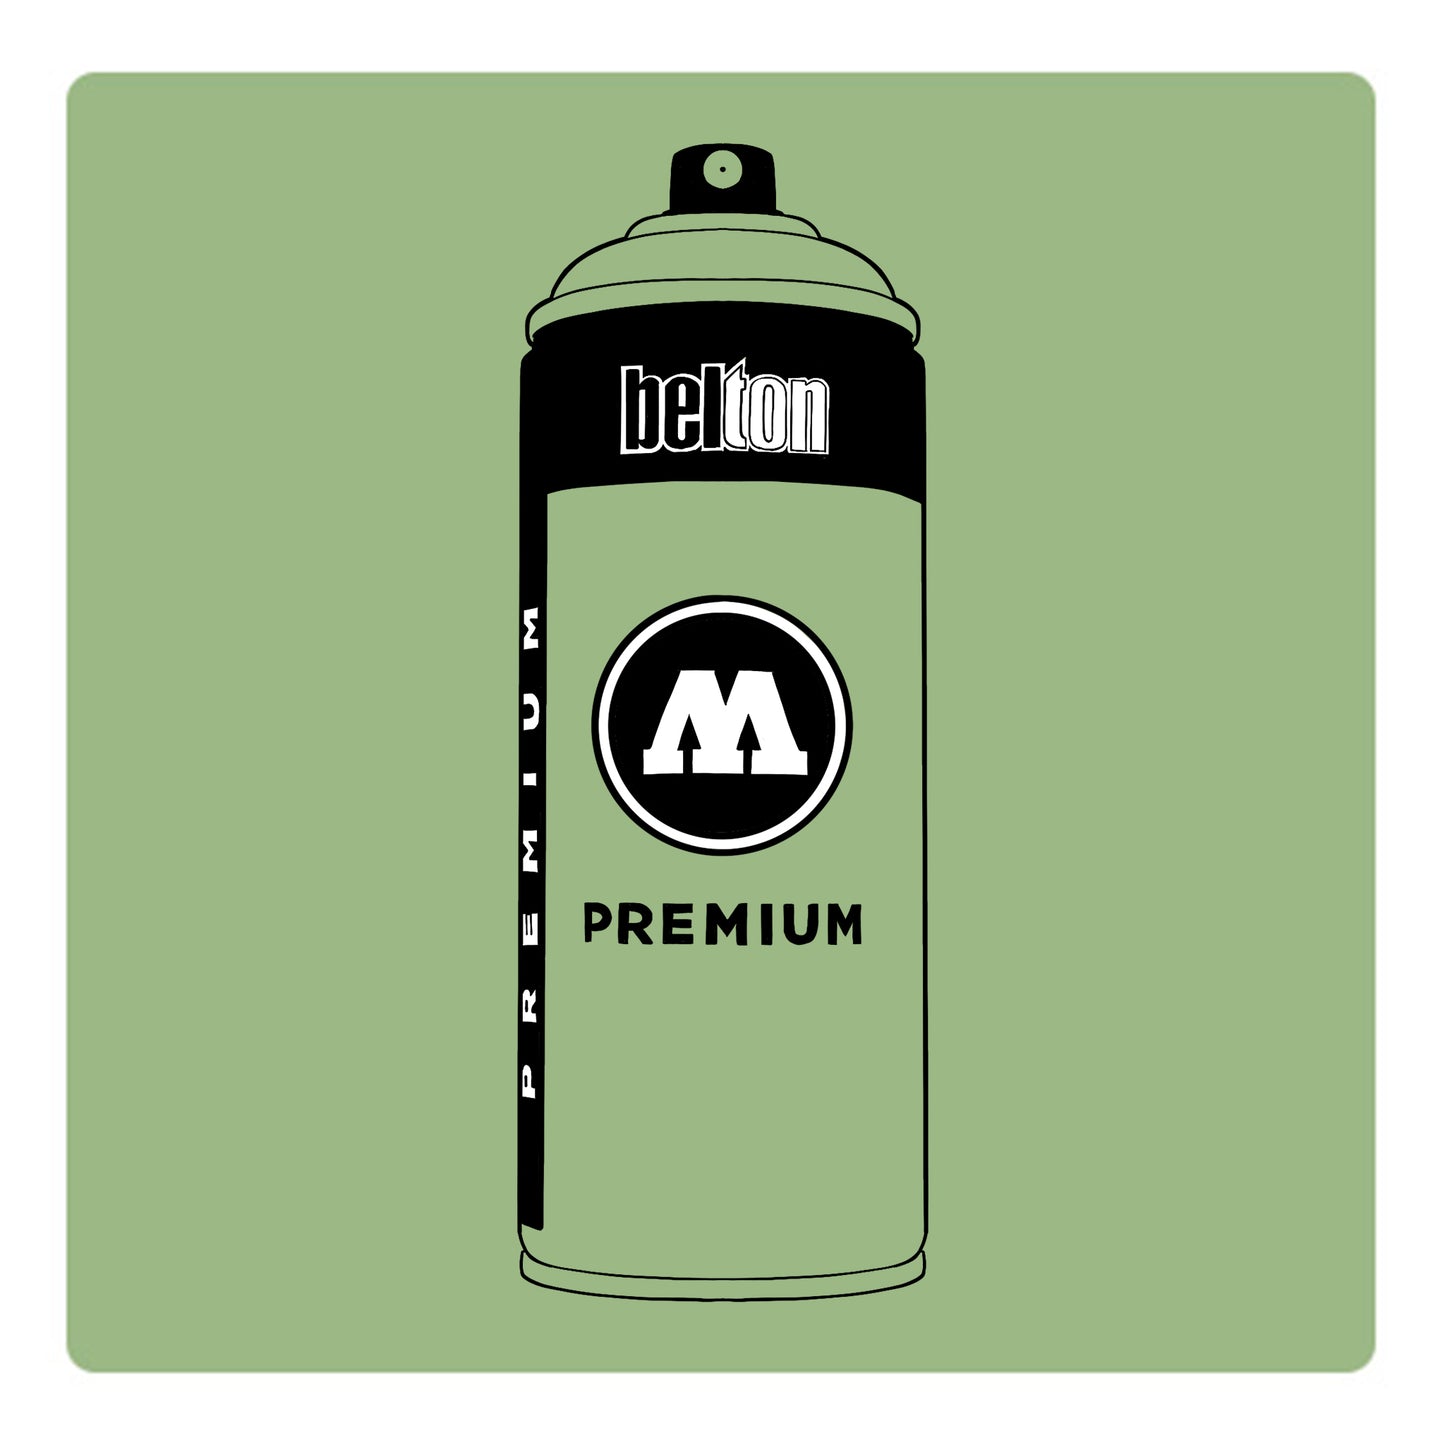 A black outline drawing of a pale olive green spray paint can with the words "belton","premium" and the letter"M" written on the face in black and white font. The background is a color swatch of the same pale olive green with a white border